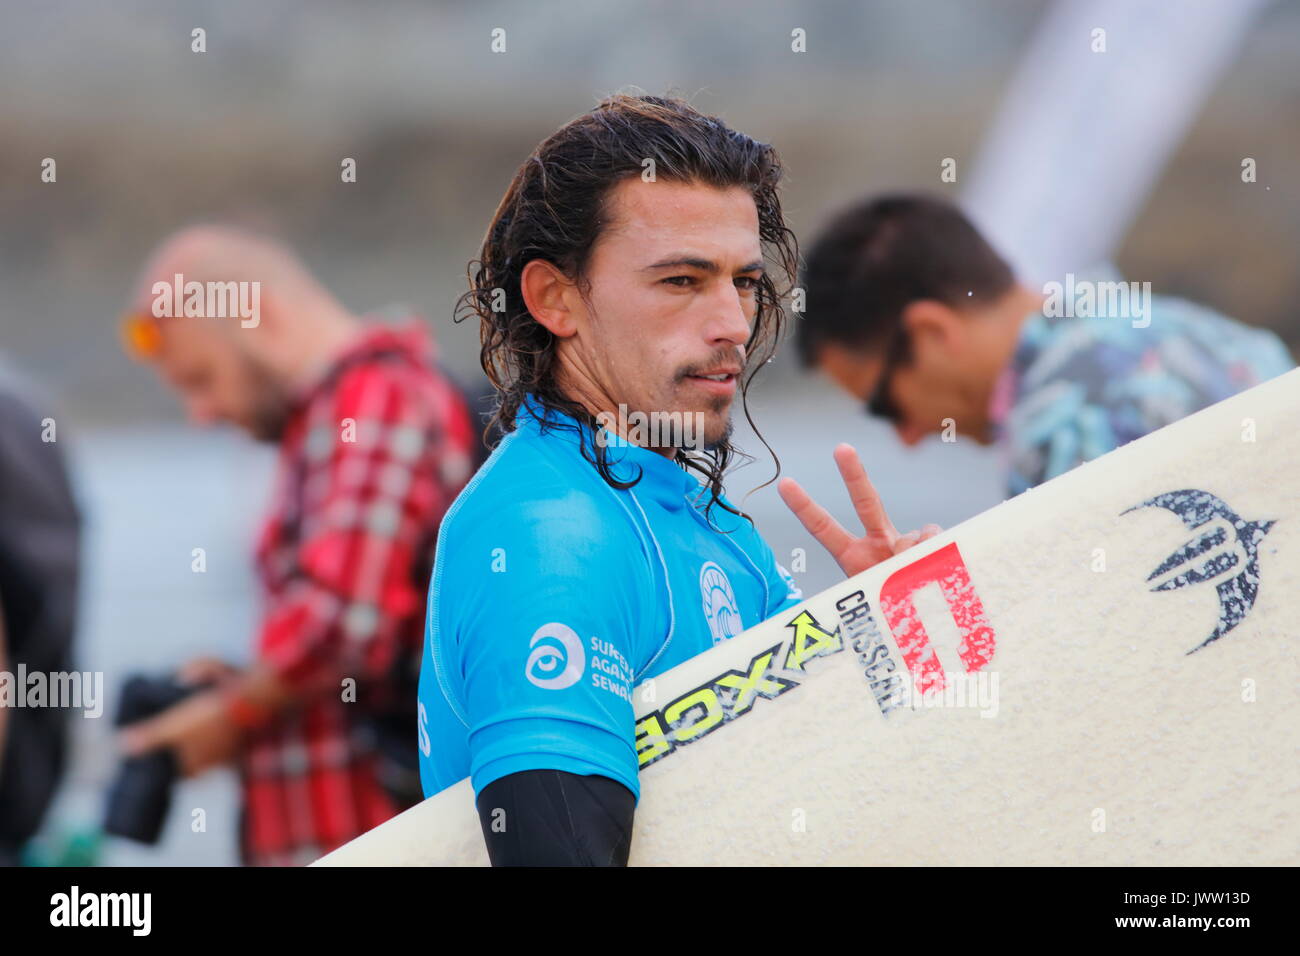 Fistral Beach, Newquay, Cornwall, UK. 13th Aug, 2017. Surfers take part in Day 5 of the Boardmasters Championship. This featured longboard surfers from around the world including Edouard Delpero seen here. Credit: Nicholas Burningham/Alamy Live News Stock Photo